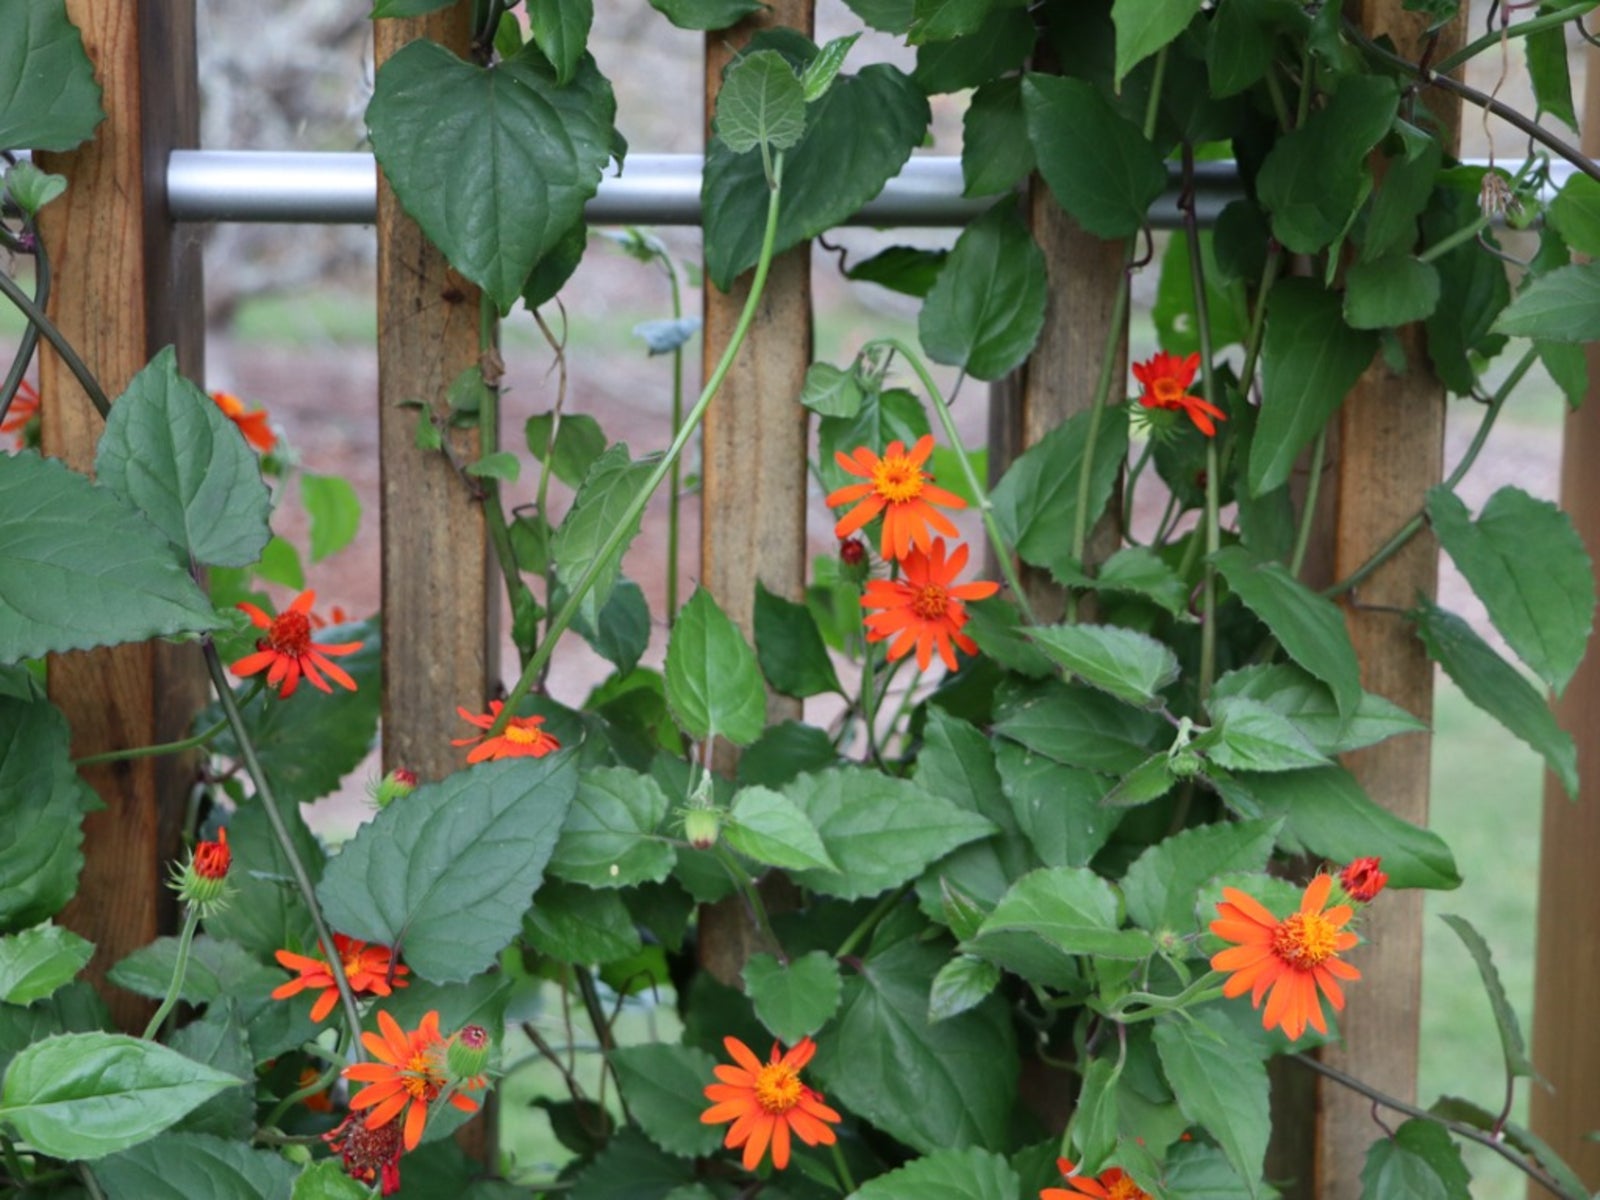 Climbing the walls (and fences, too) with these Vining Plants